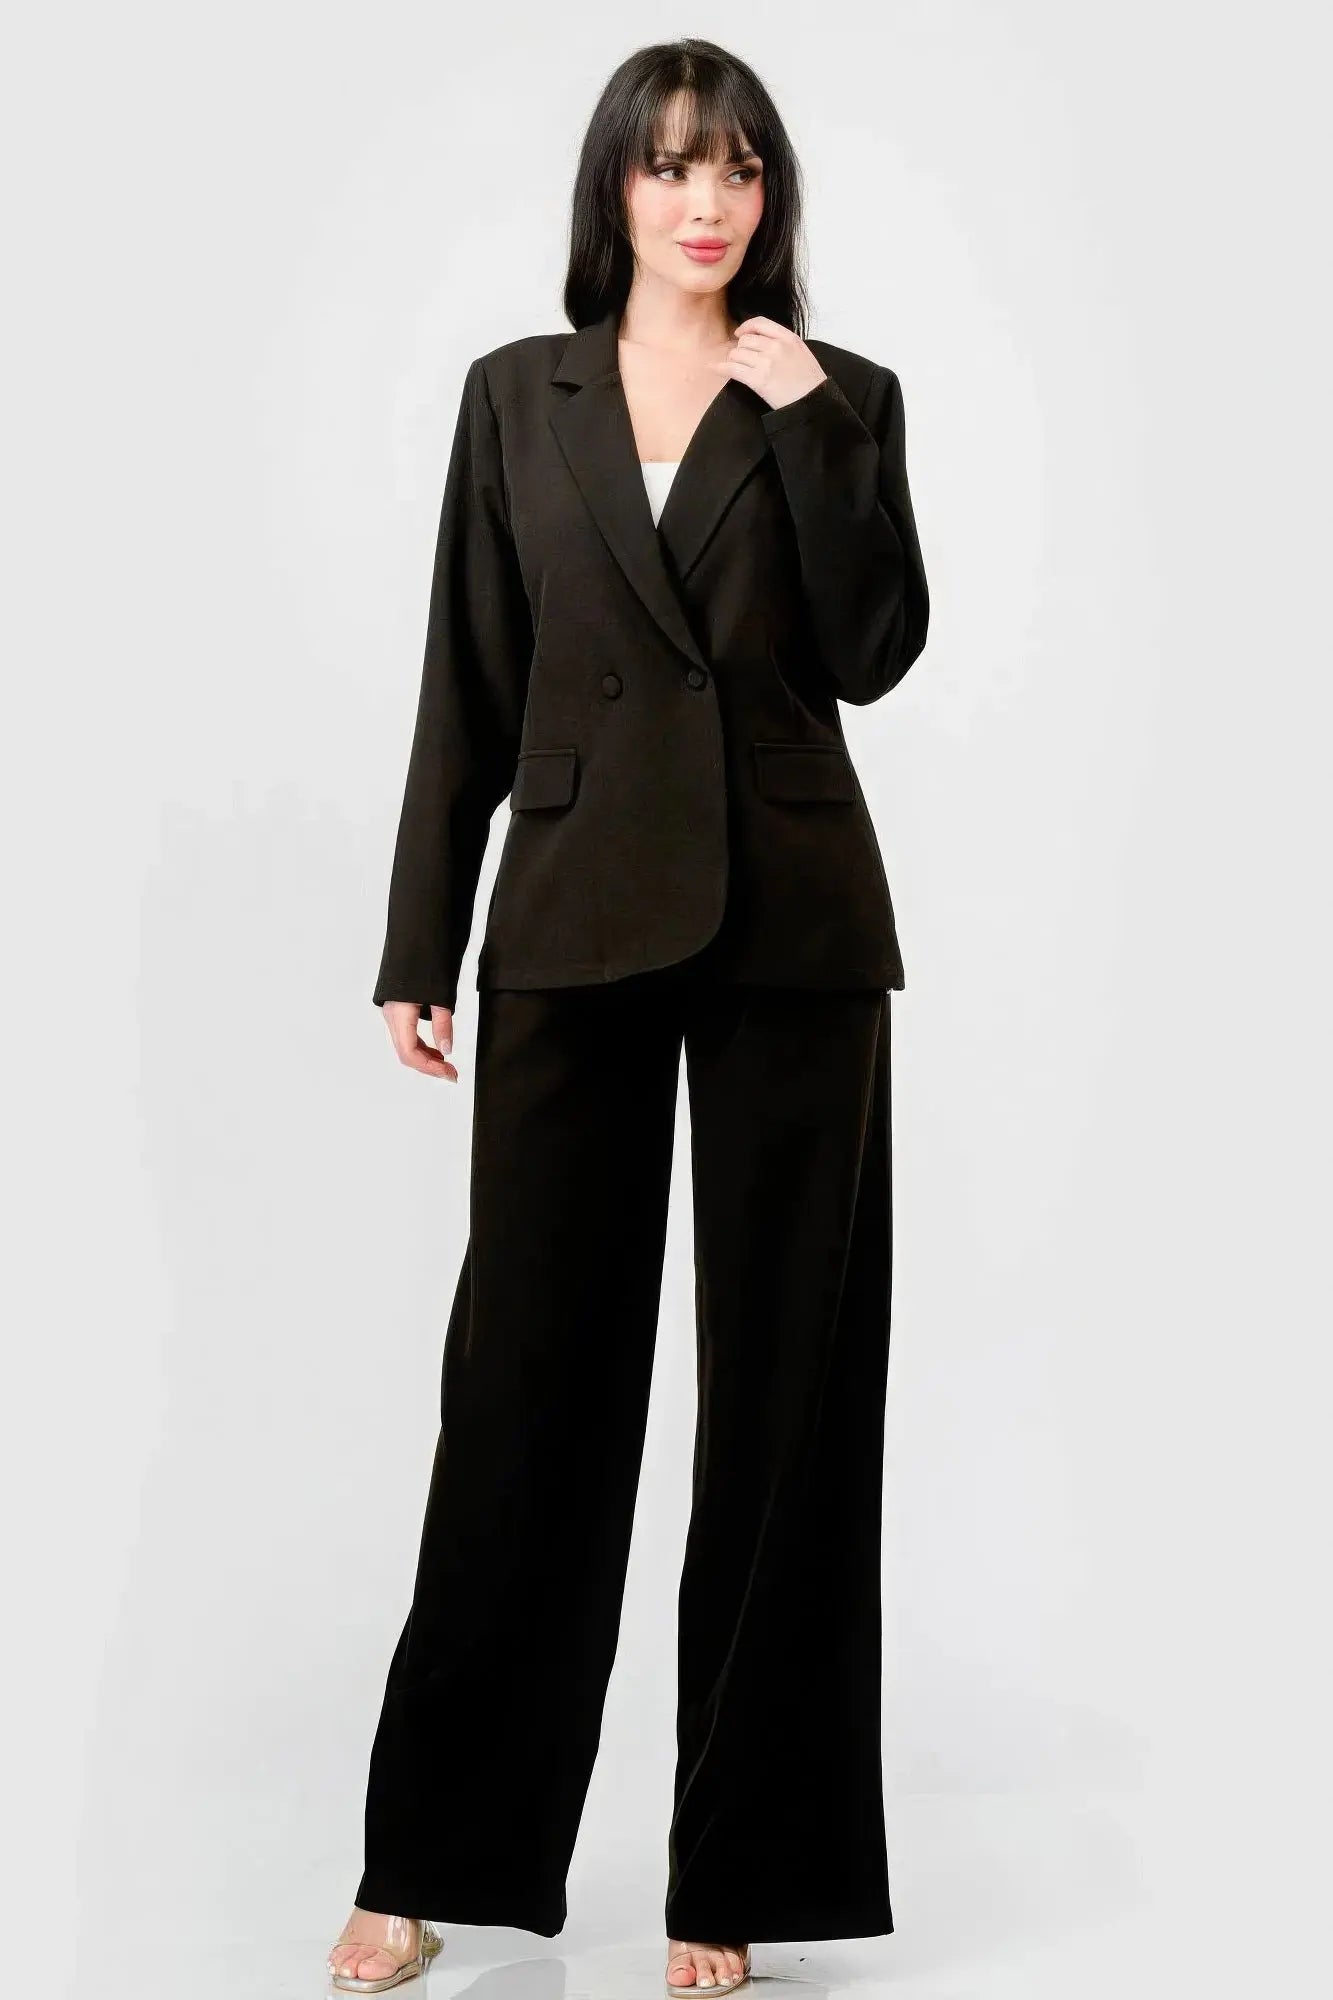 Elaine's Luxe Stretch Woven Loose Fit Blazer And Wide Legs Pants Semi Formal Set Blue Zone Planet